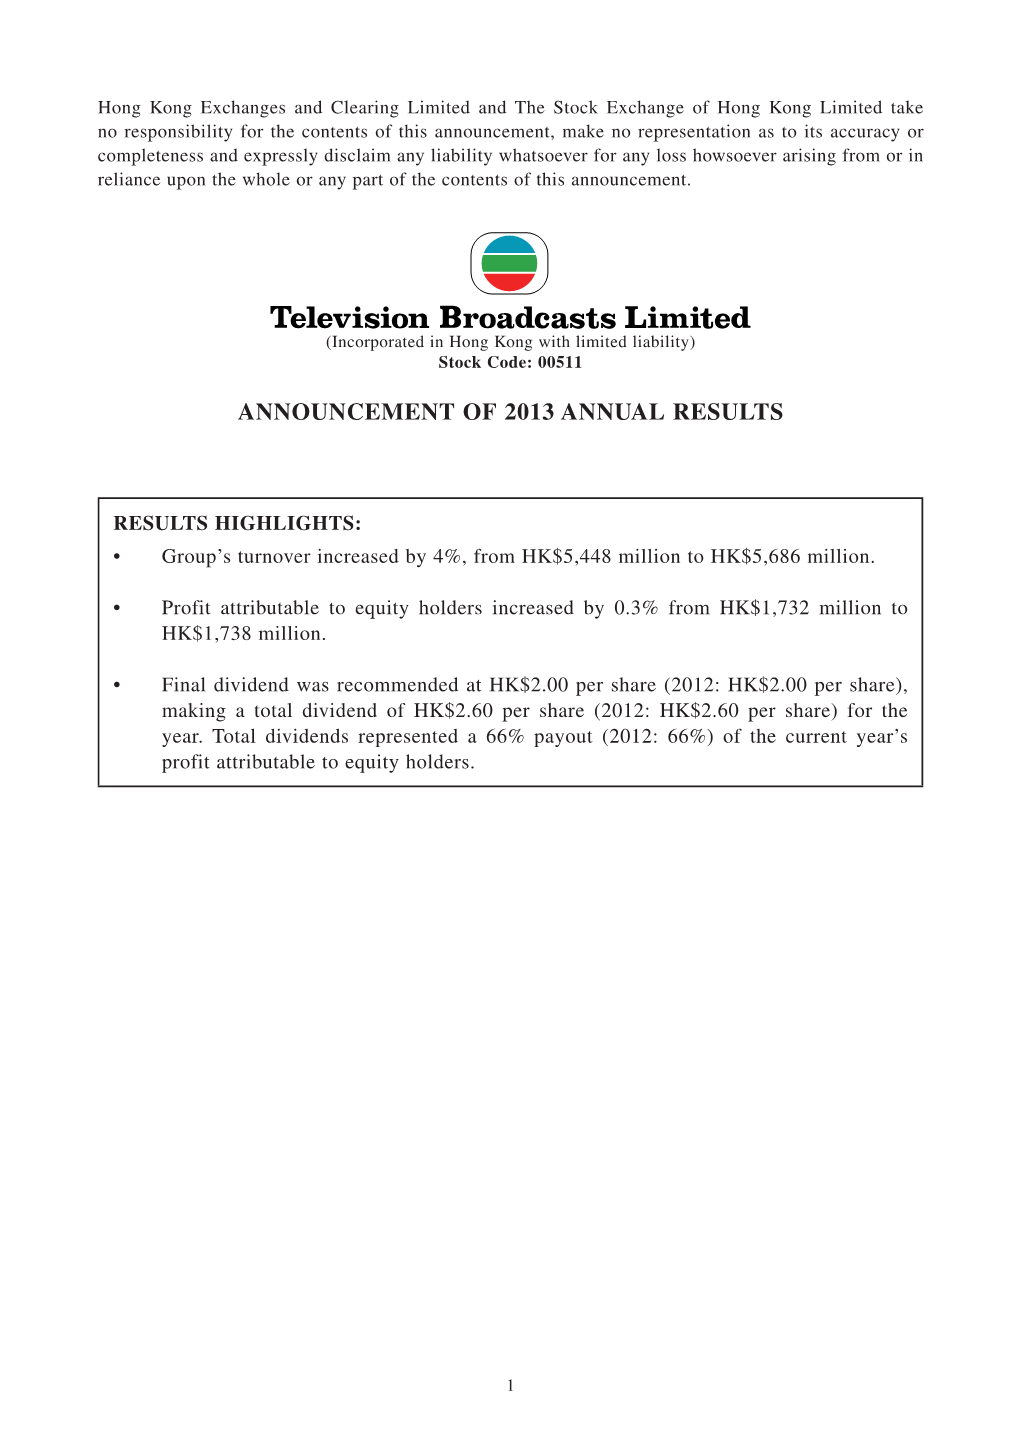 Announcement of 2013 Annual Results